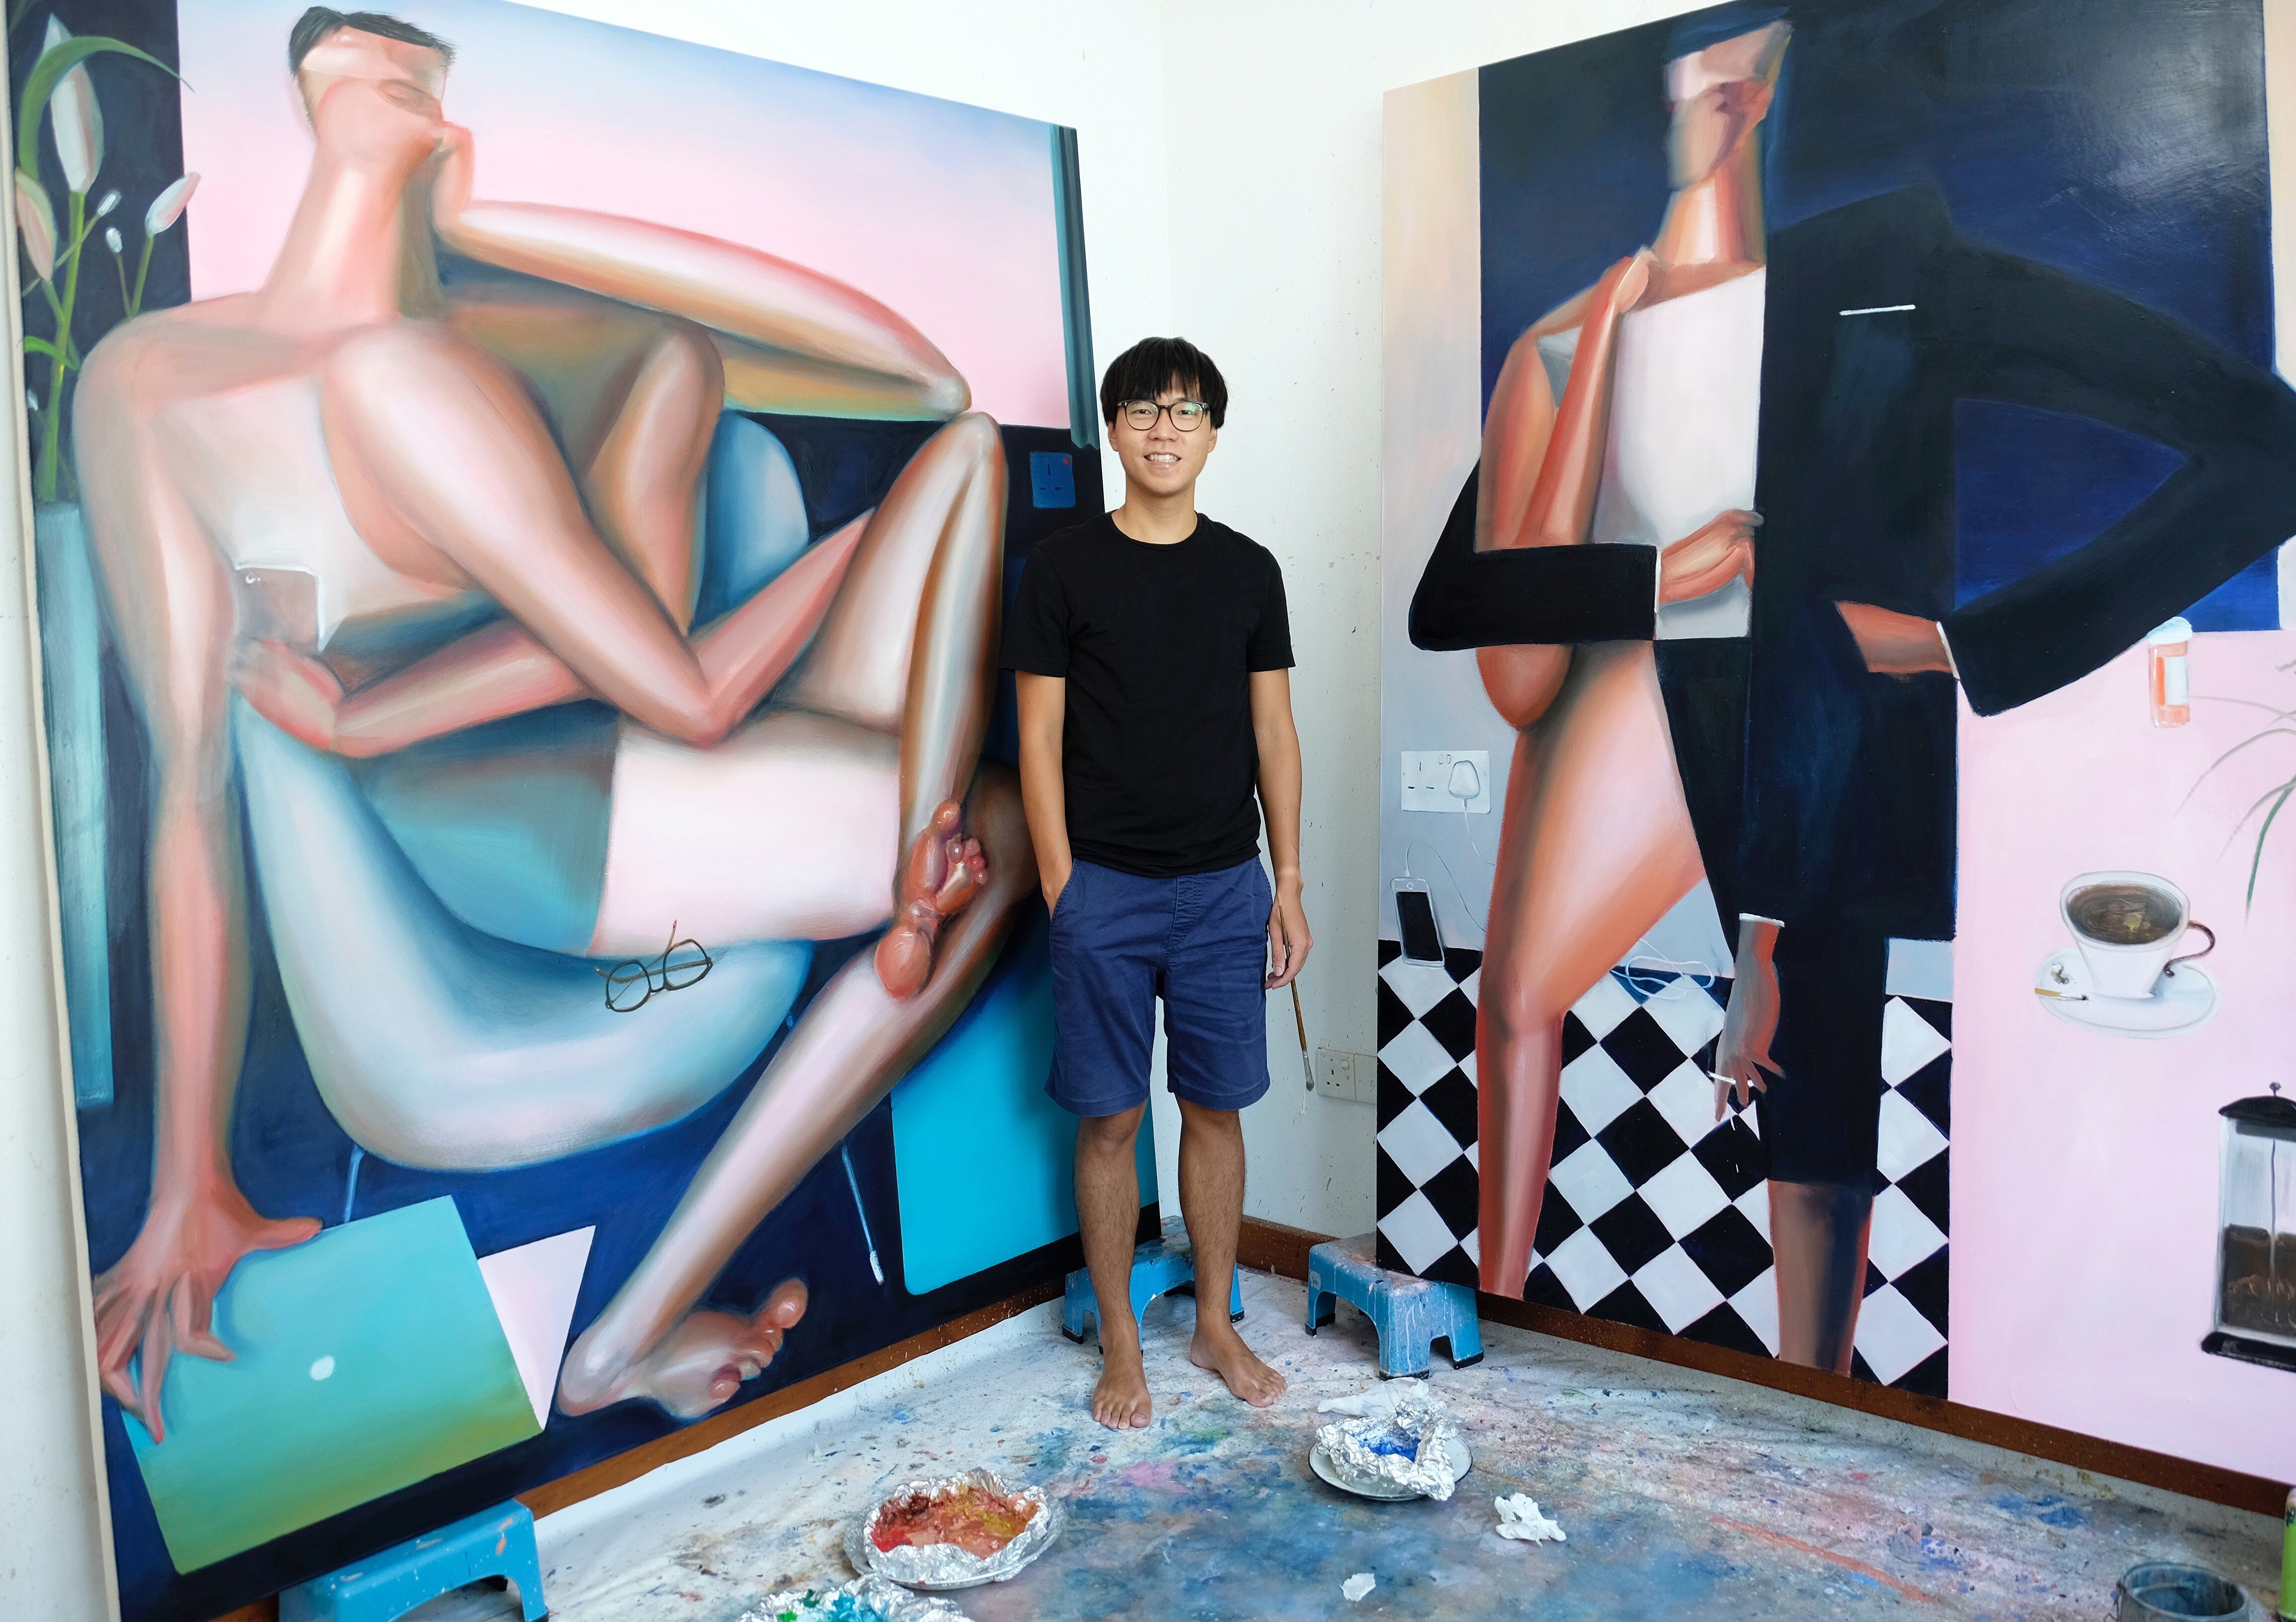 Singaporean painter Alvin Ong is usually based in London but ended up extending his stay in Singapore as the pandemic worsened. During his isolation period, he completed a series of paintings for a solo exhibition at Sydney’s Yavuz Gallery in May. Photo: Alvin Ong